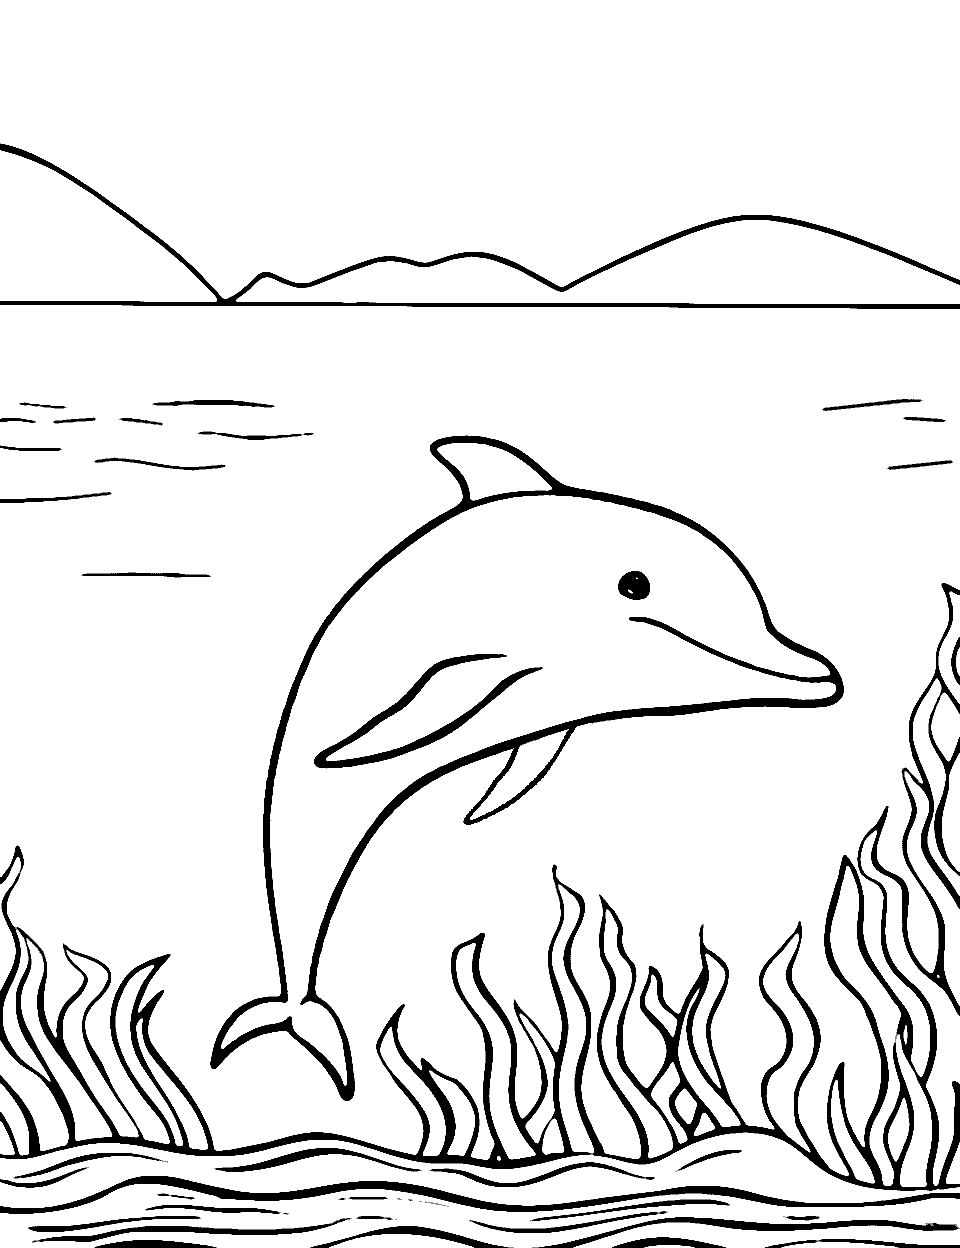 Dolphin in the Shallow River Coloring Page - A river dolphin gracefully cruising in a gentle, flowing river surrounded by soft riverbanks.